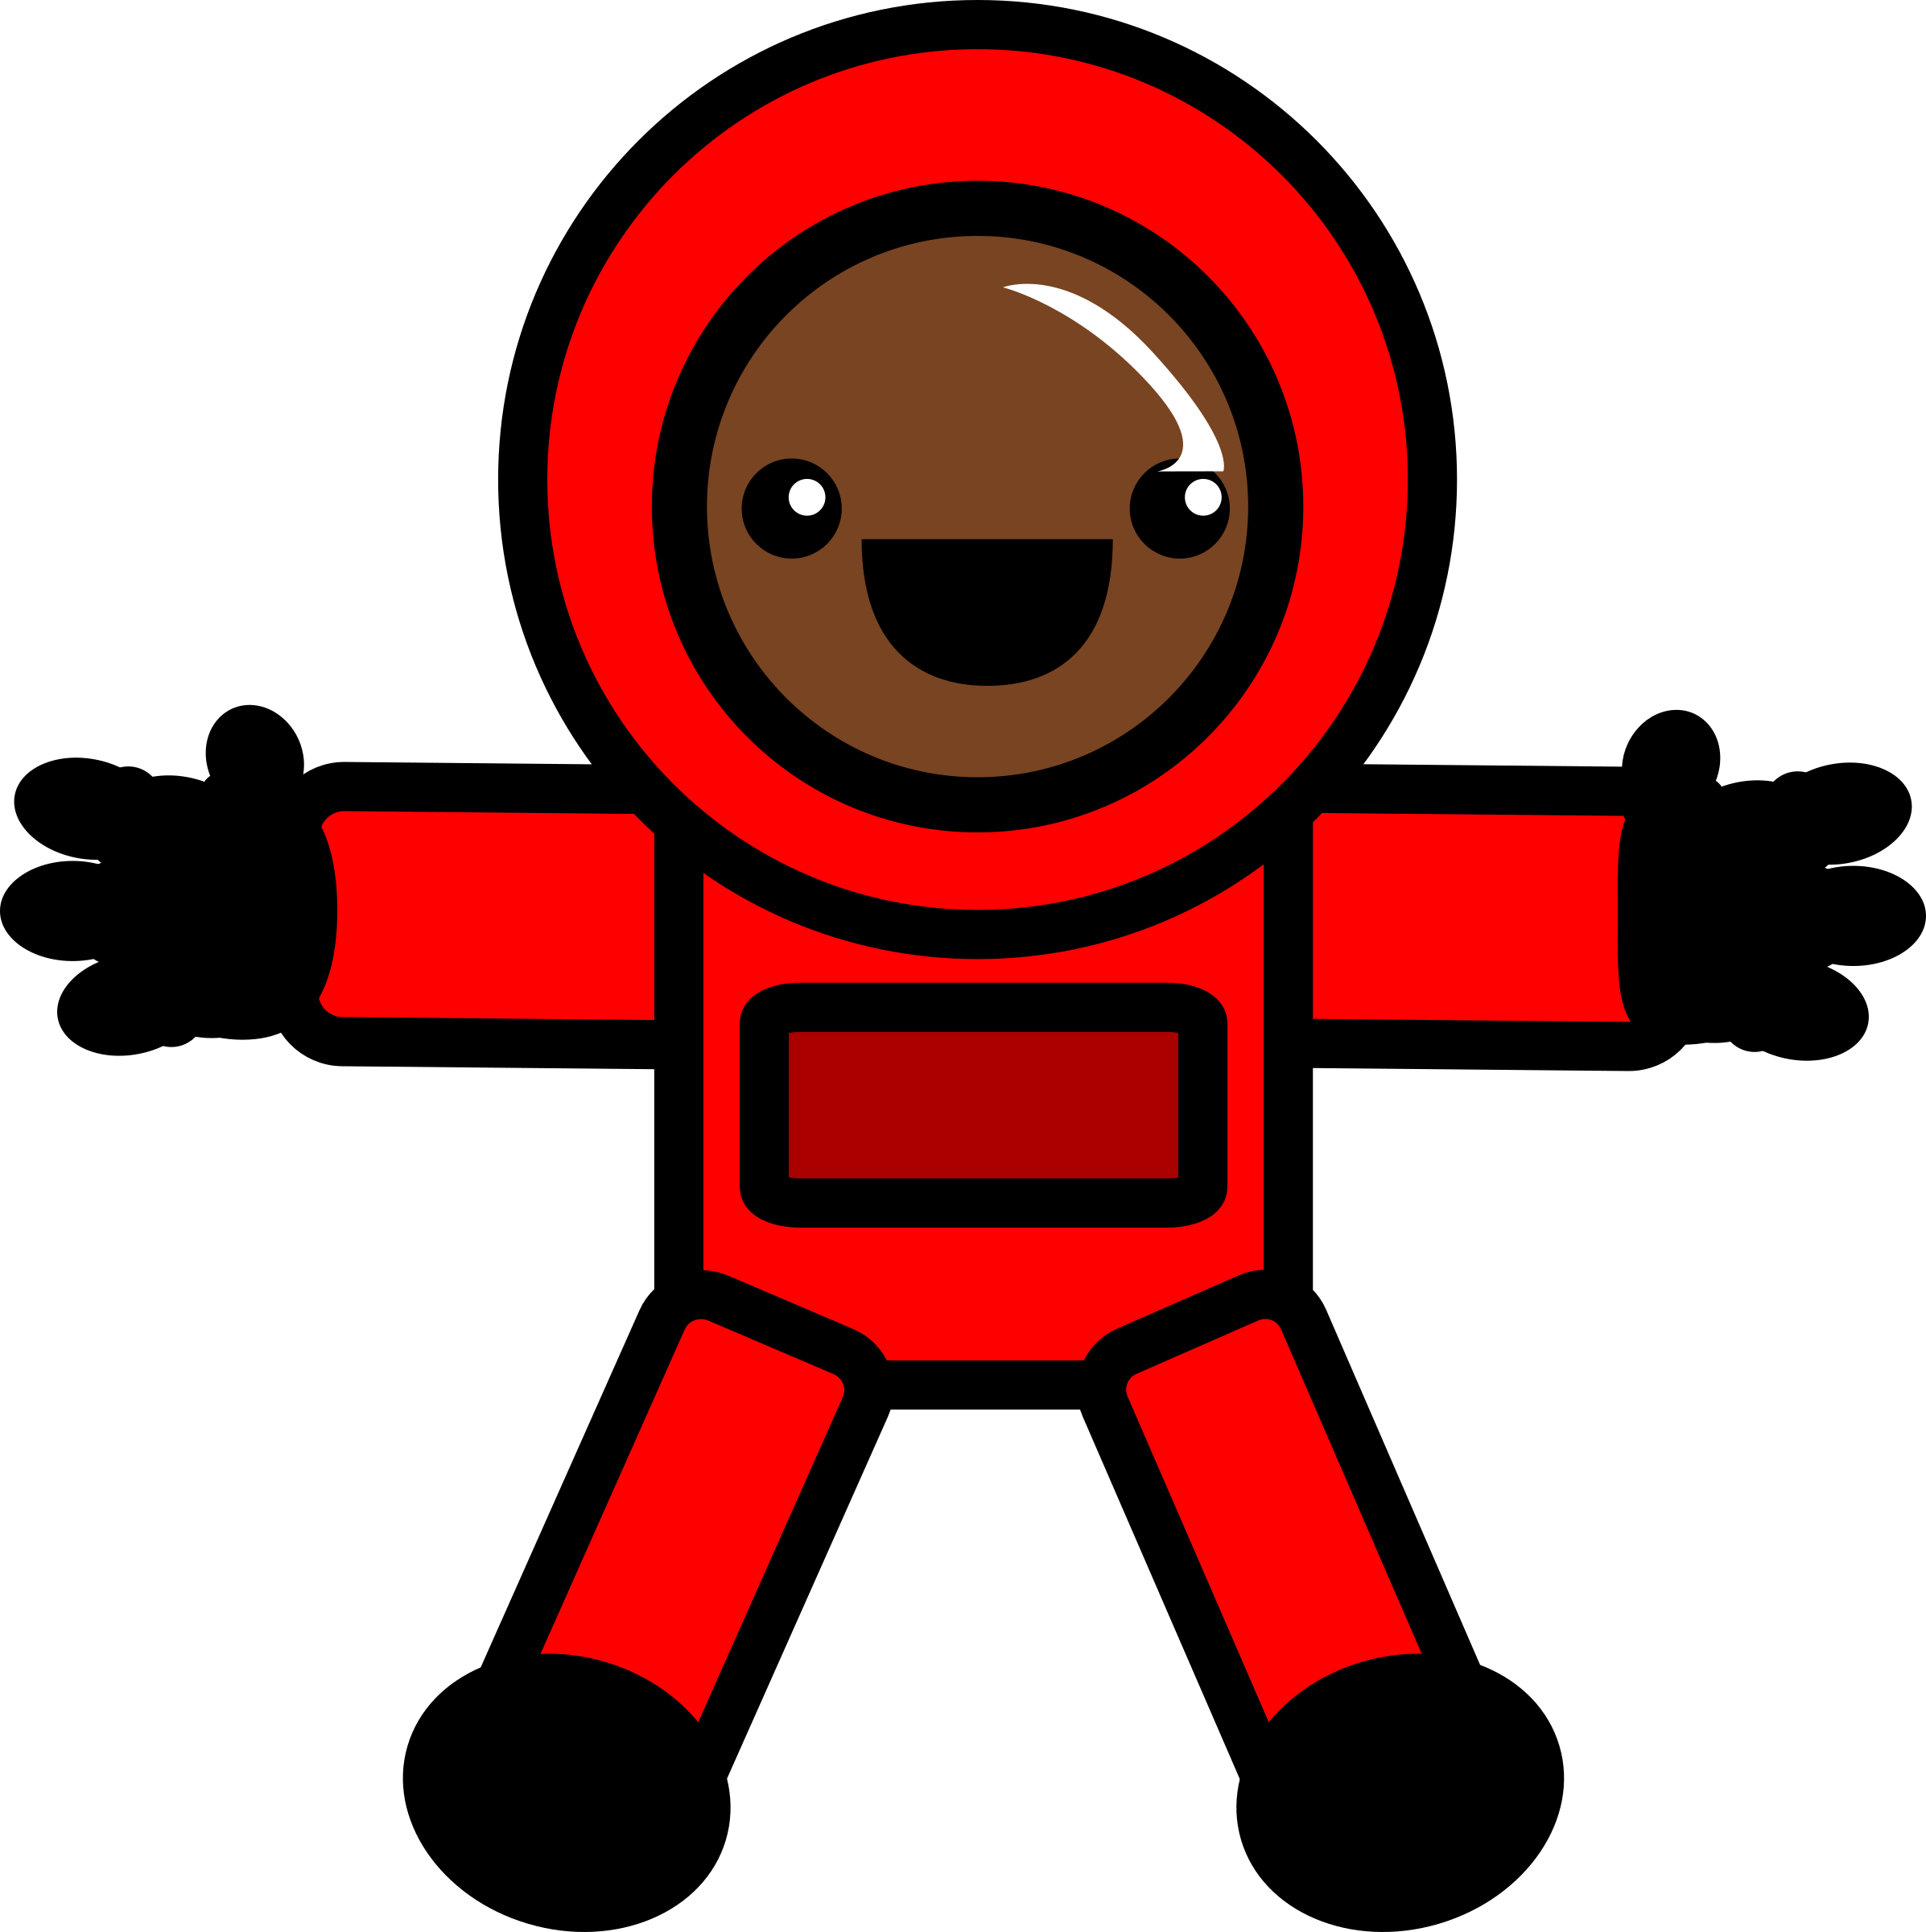 Astronaut in Red Space Suit vector clipart image - Free stock photo